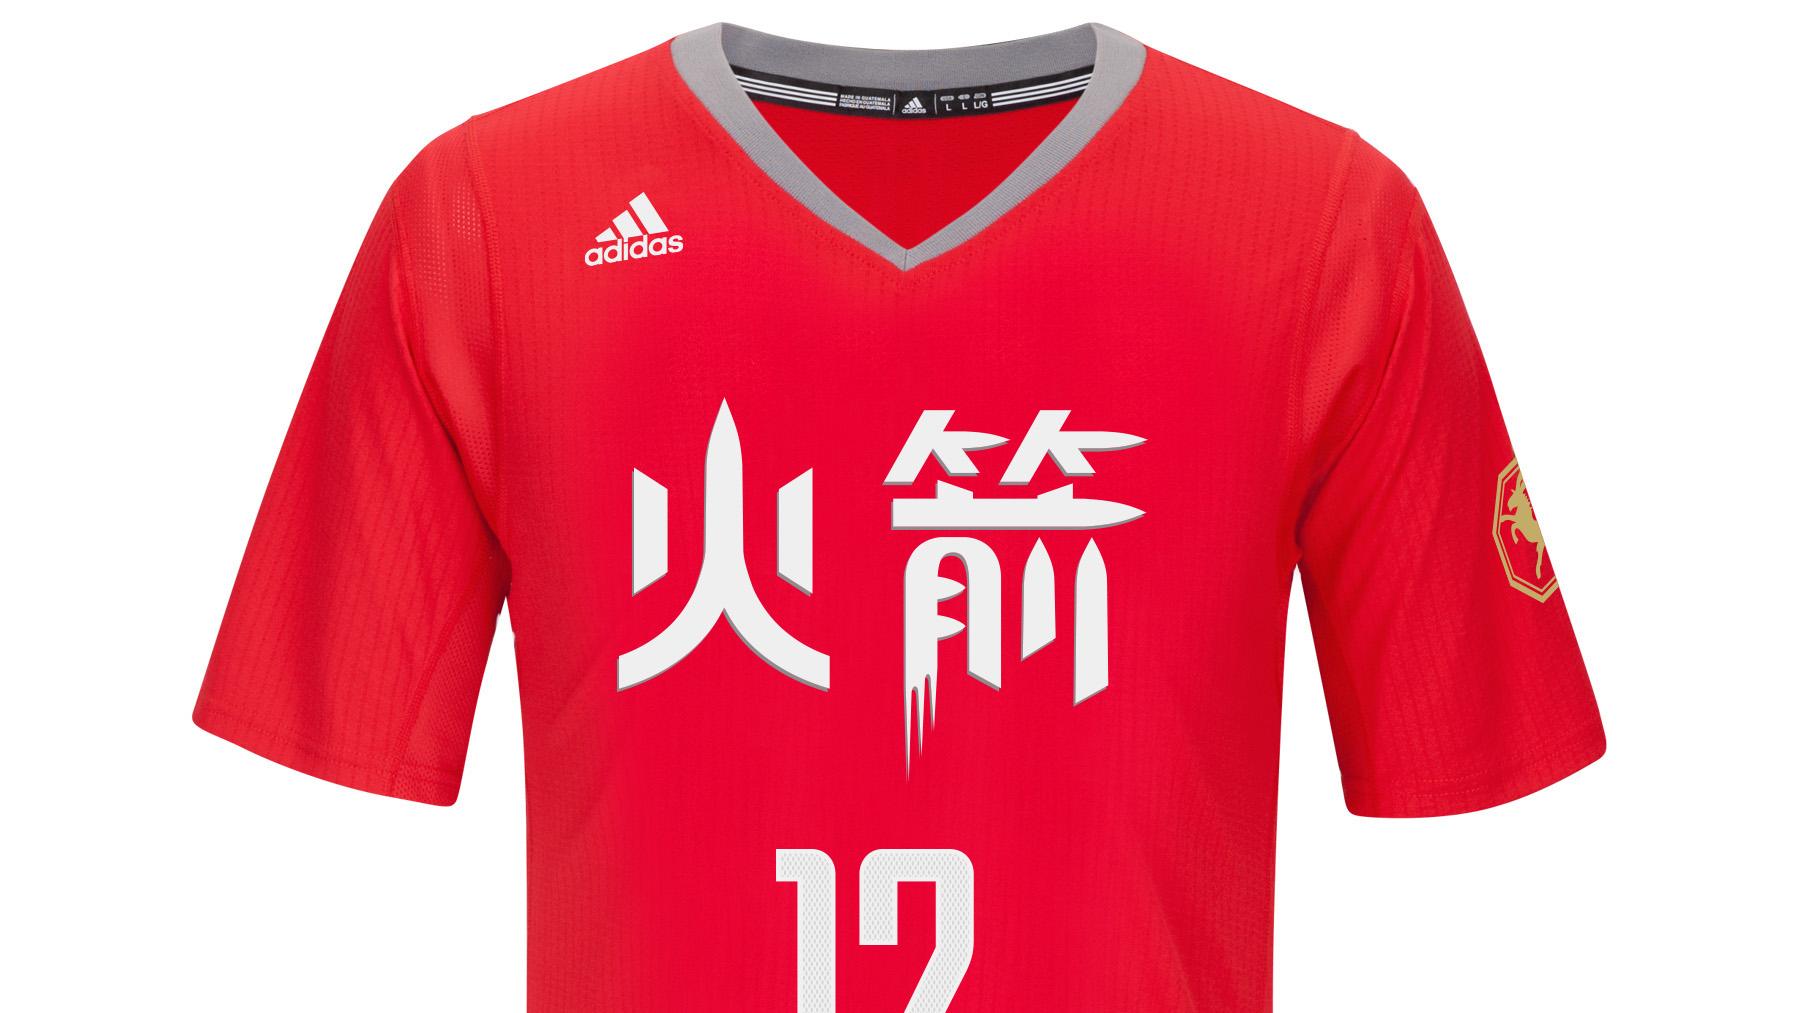 The NBA will celebrate the Chinese New Year with special Chinese-themed uniforms for the Golden State Warriors and the Houston Rockets, whose shirt is pictured here.